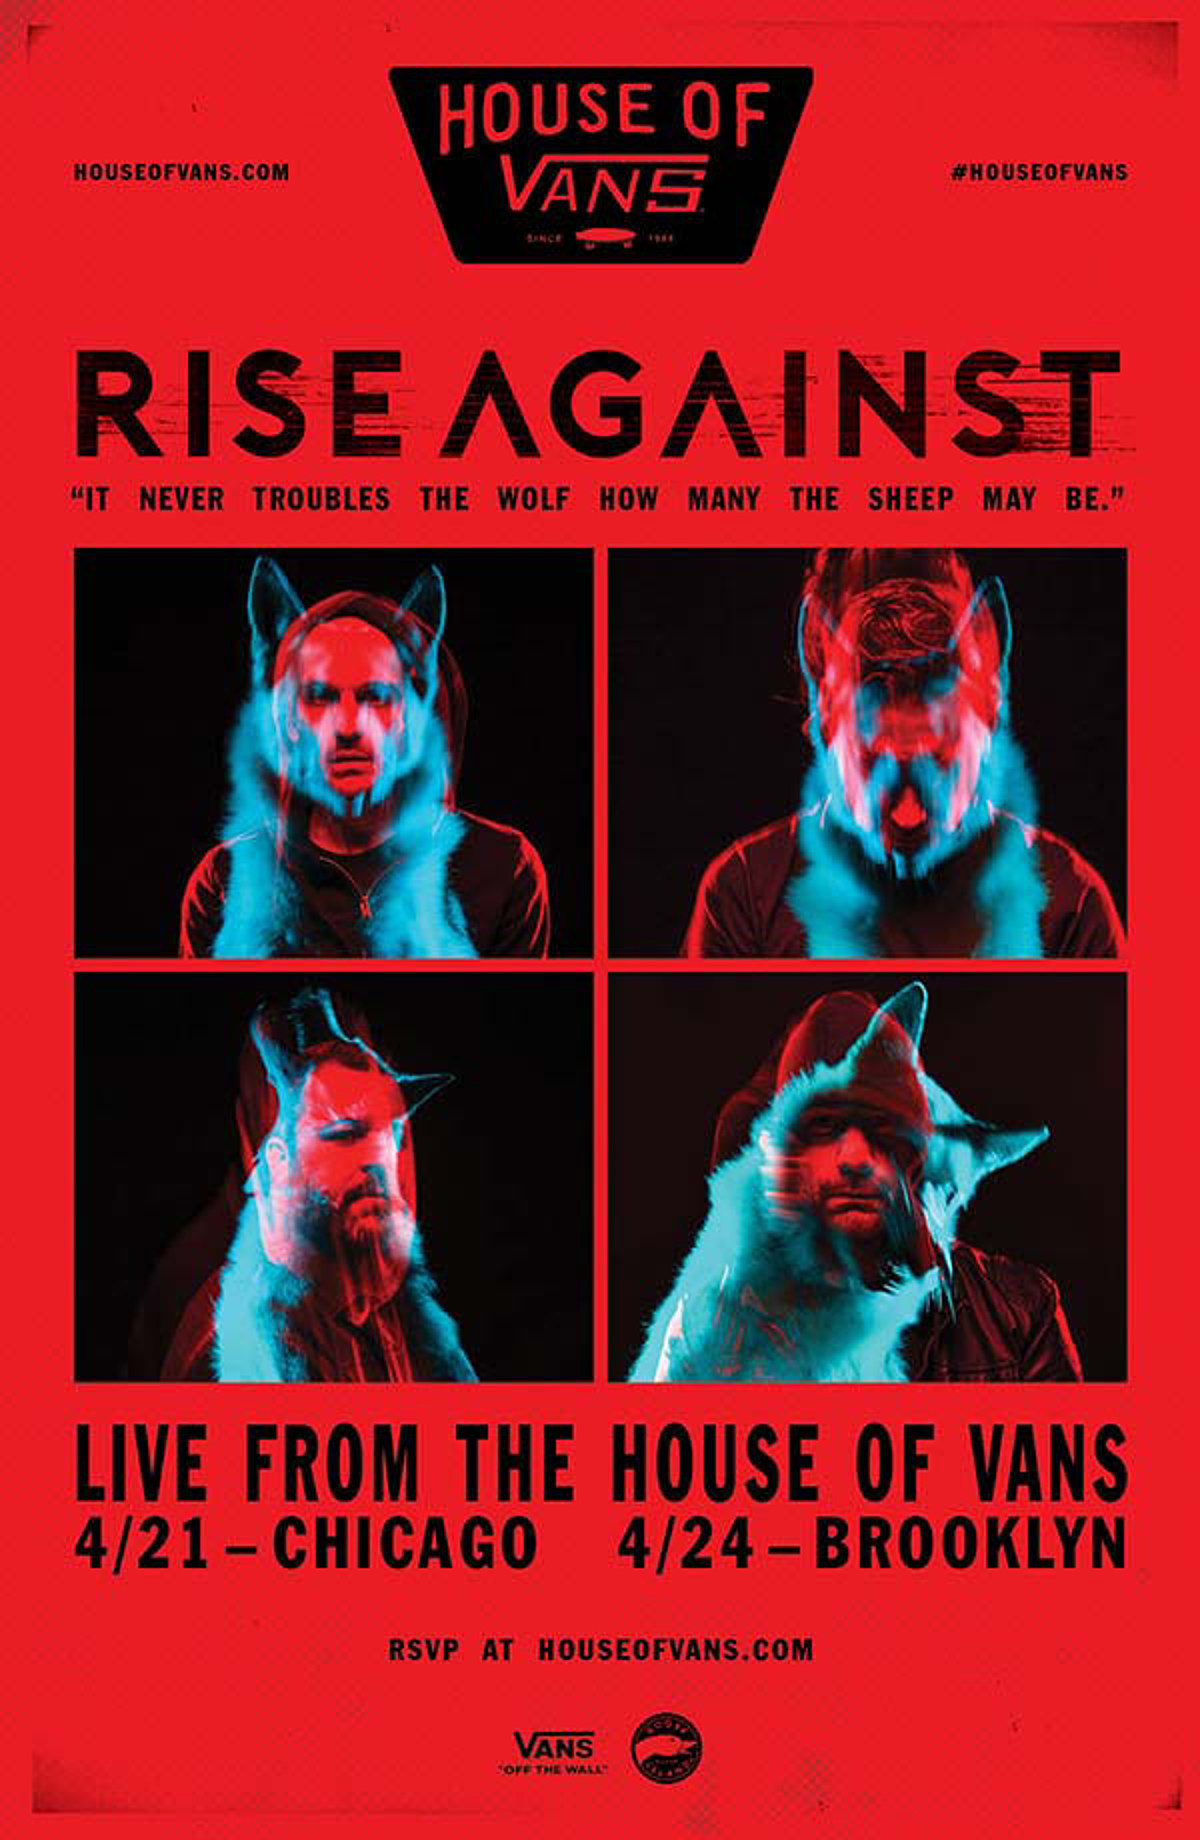 Rise Against playing FREE House of Vans shows (NYC with Walter Schreifels)